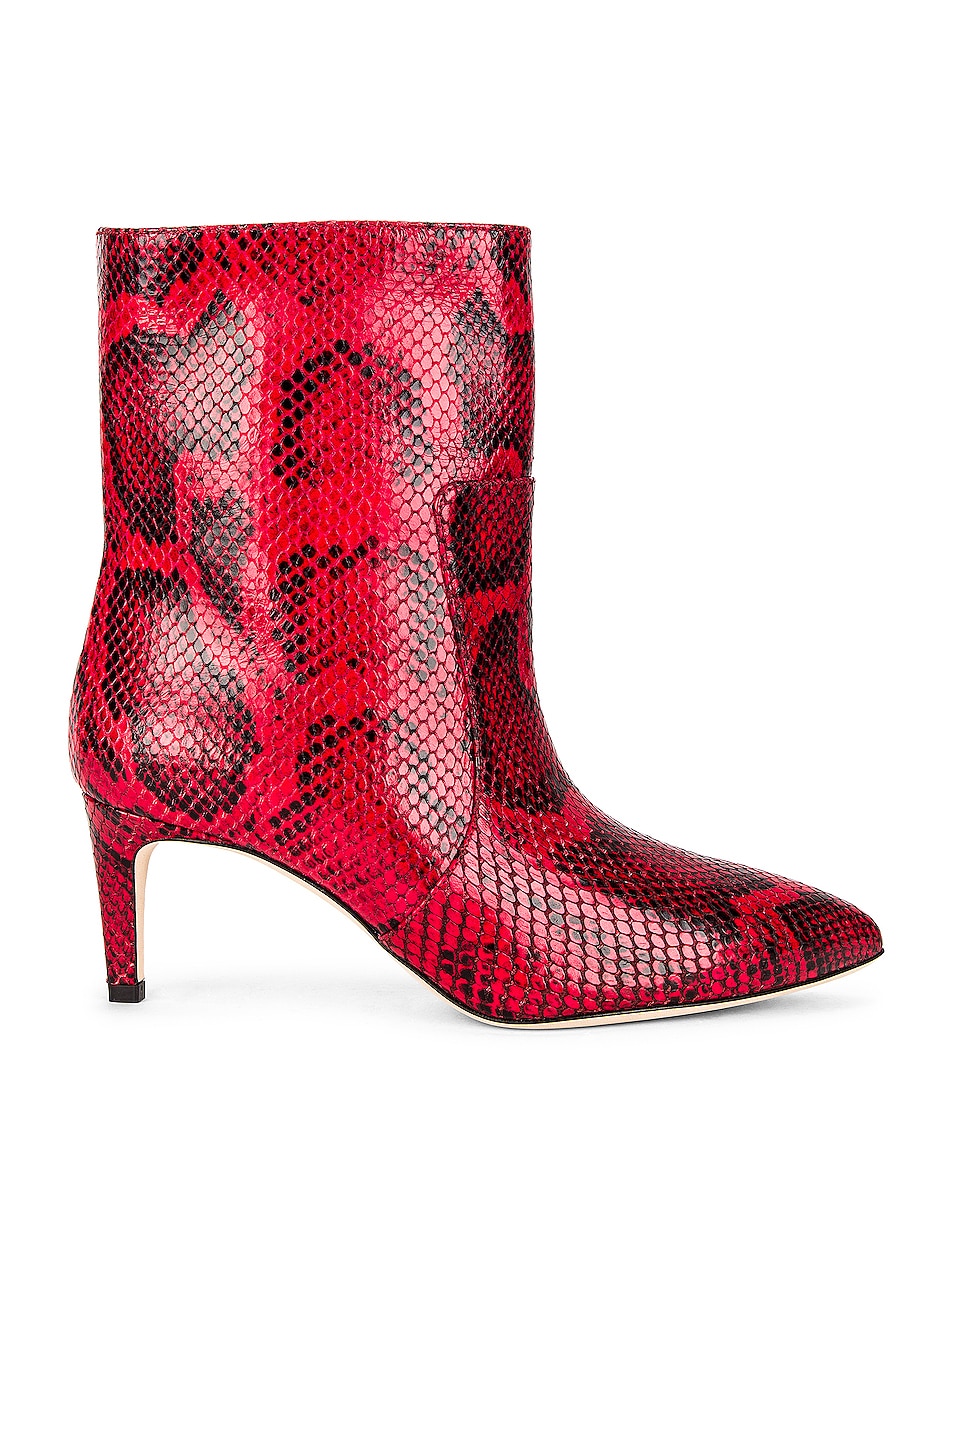 Image 1 of Paris Texas Python Print Stiletto Ankle Boot in Red